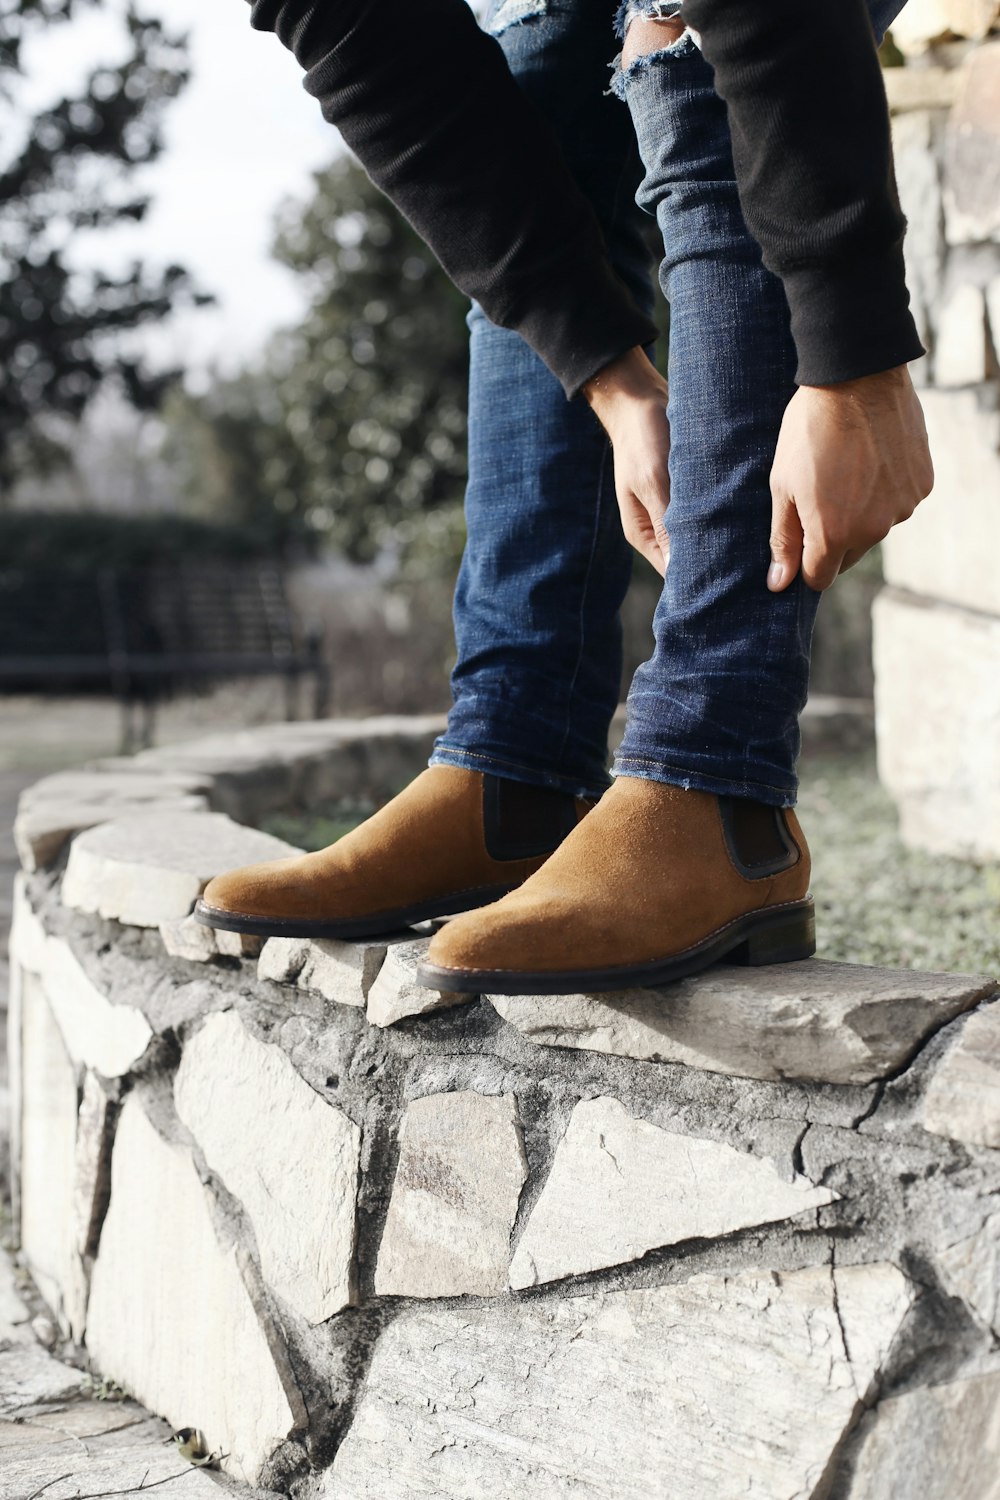 person wearing blue jeans and brown suede Chelsea boots standing photo – Free Clothing Image on Unsplash